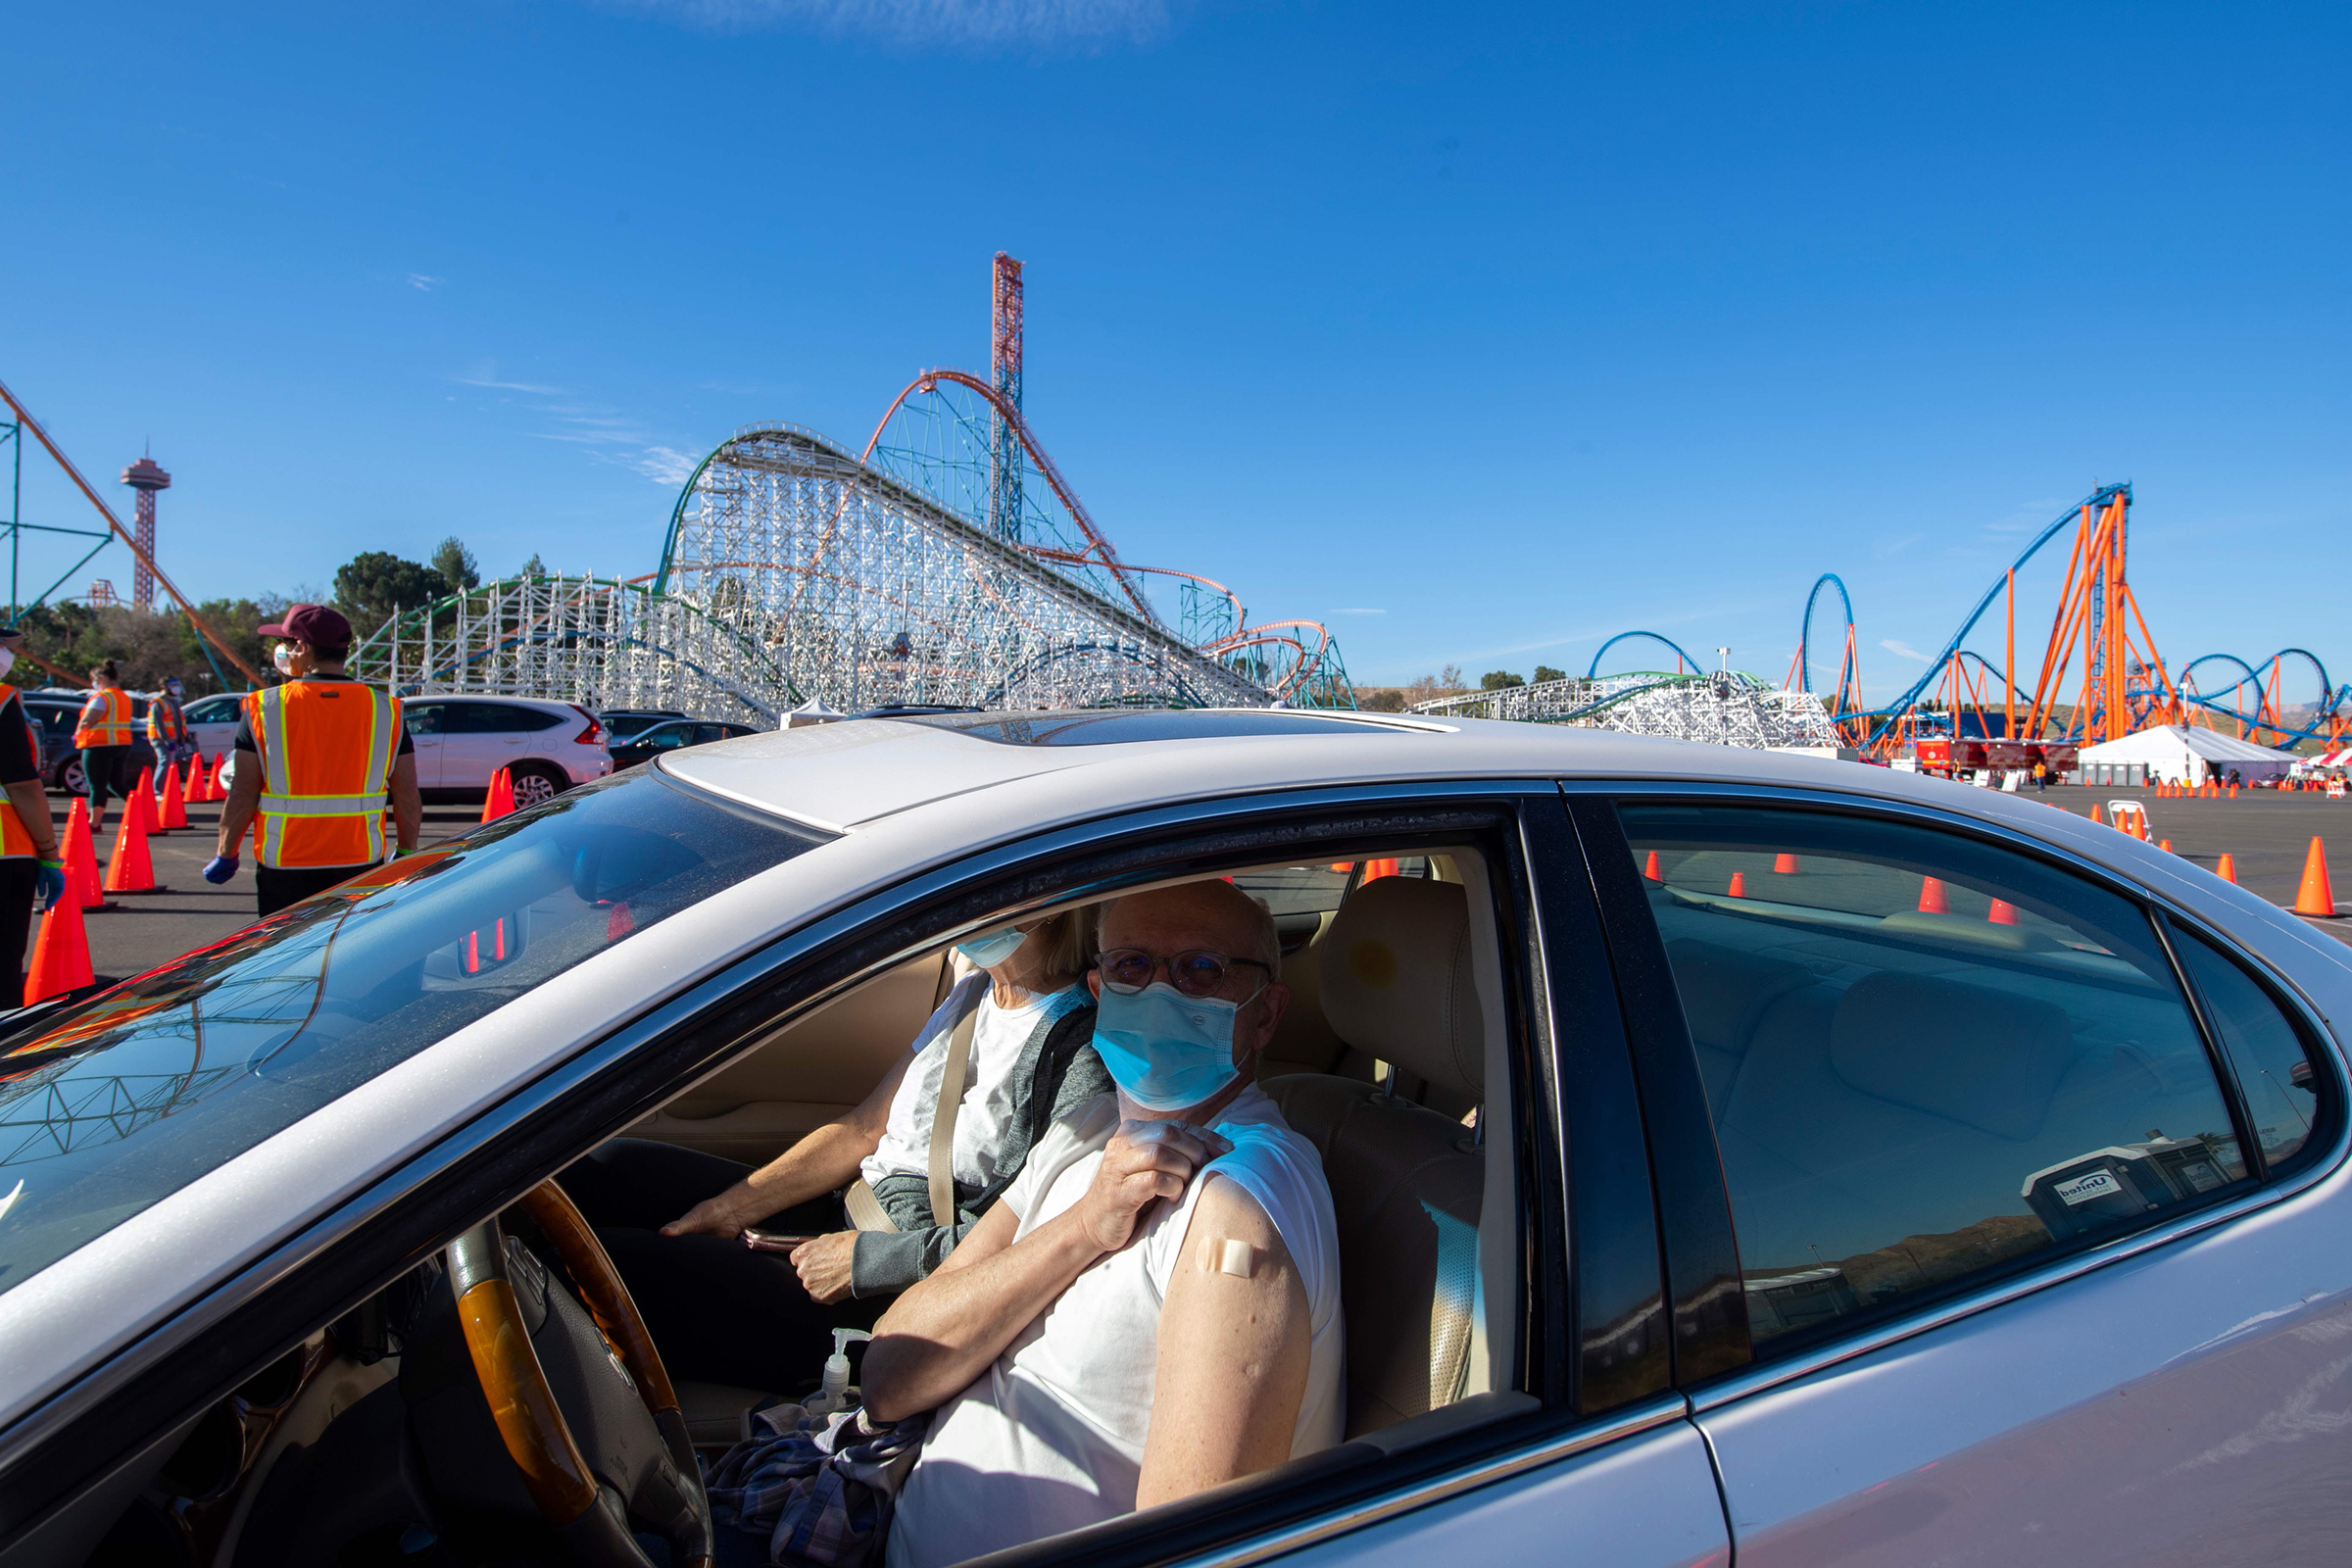 A vaccination site at Six Flags Magic Mountain in Valencia, Calif., on Feb. 2, 2021. (Valerie Macon—AFP/Getty Images)